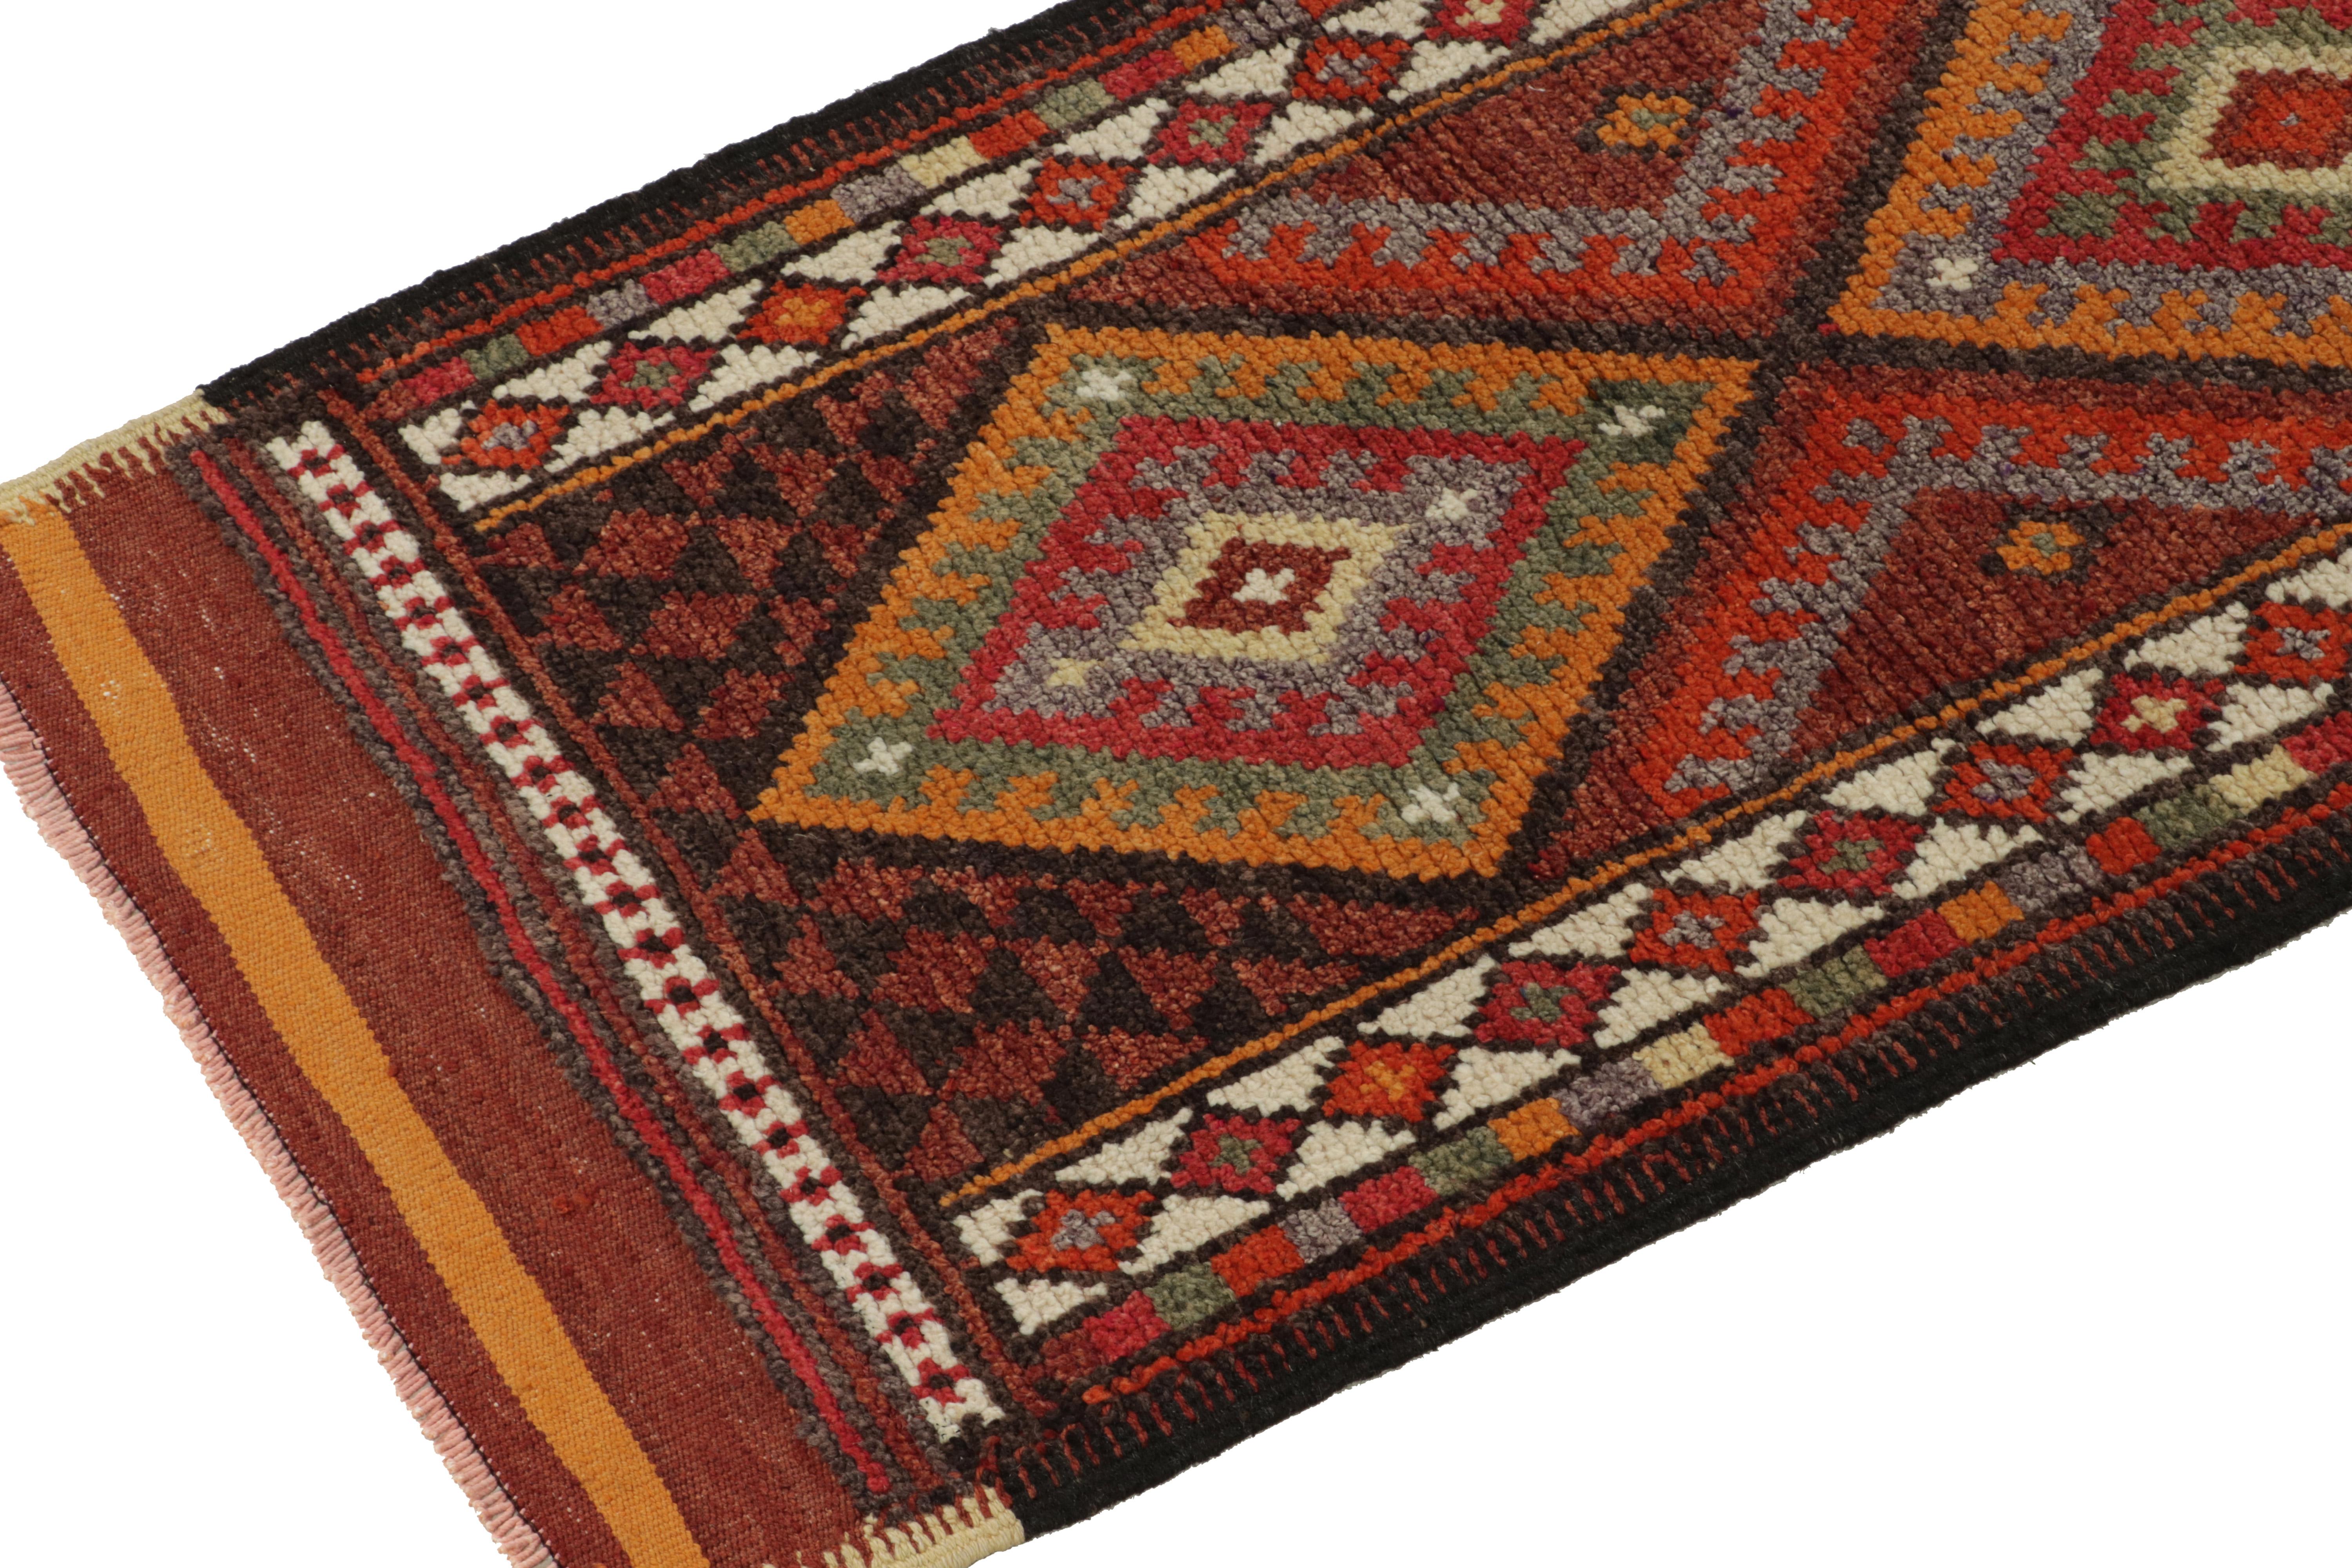 1950s Vintage Tribal Runner in Red, Orange, Geometric Patterns by Rug & Kilim In Good Condition For Sale In Long Island City, NY